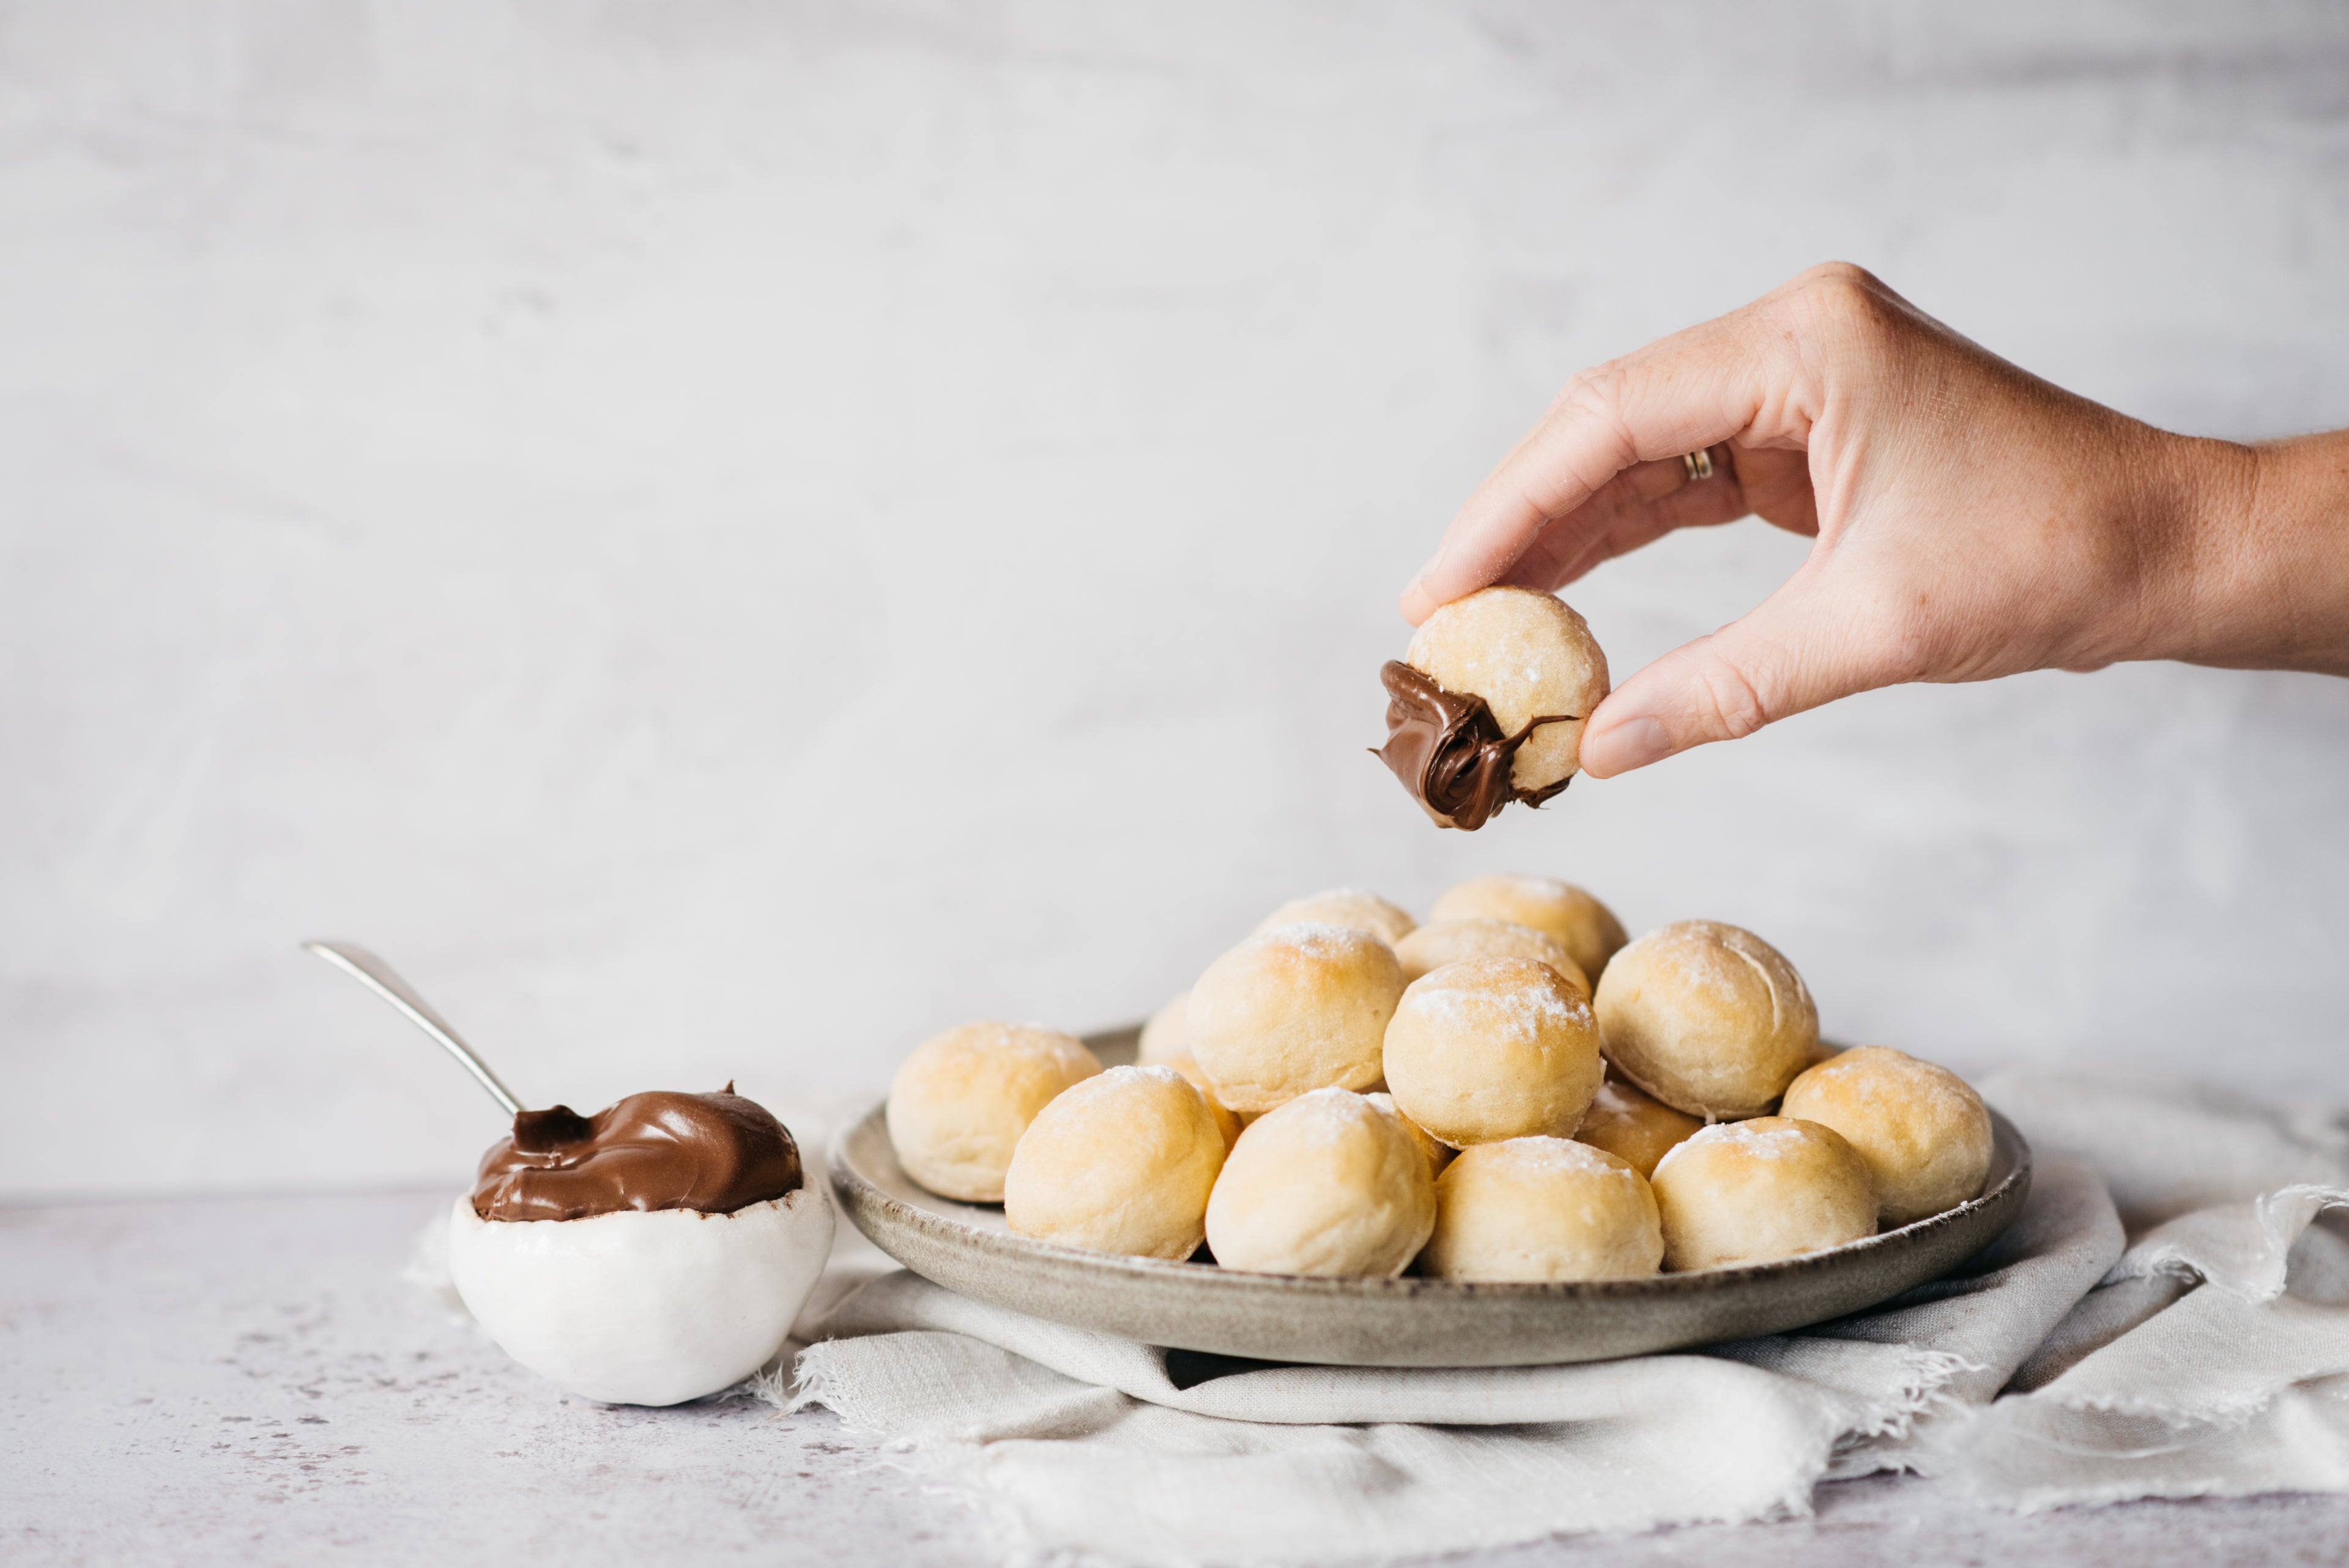 Plate of Chocolate Dough Balls with a hand holding a ball dipped in chocolate sauce. Next to a bowl of chocolate sauce, with a spoon